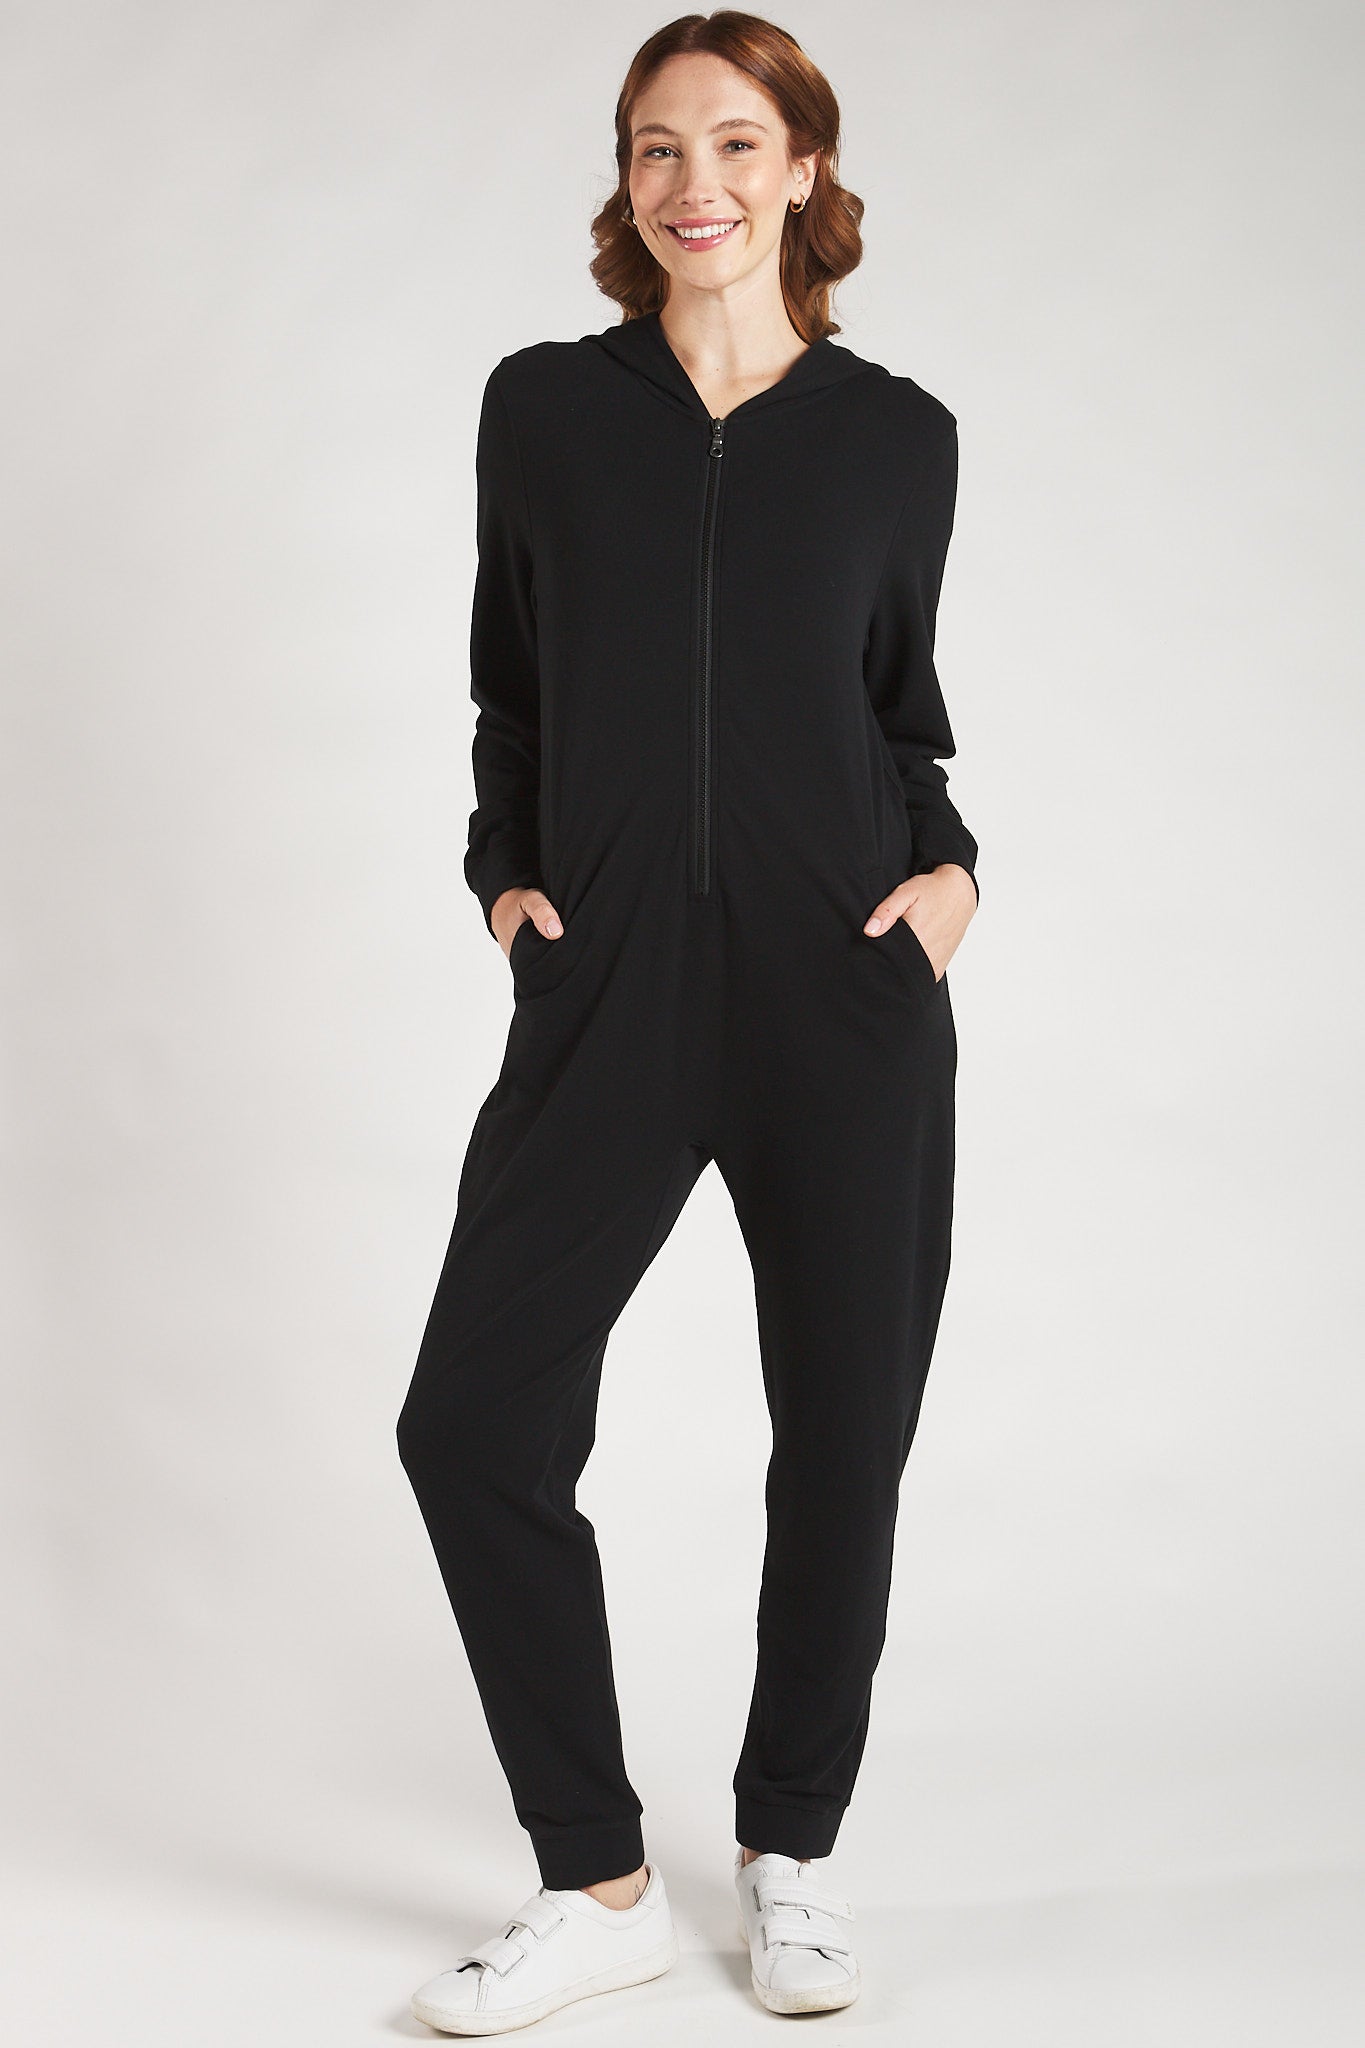 Women's black lounge jumpsuit made with sustainable bamboo from Terrera.